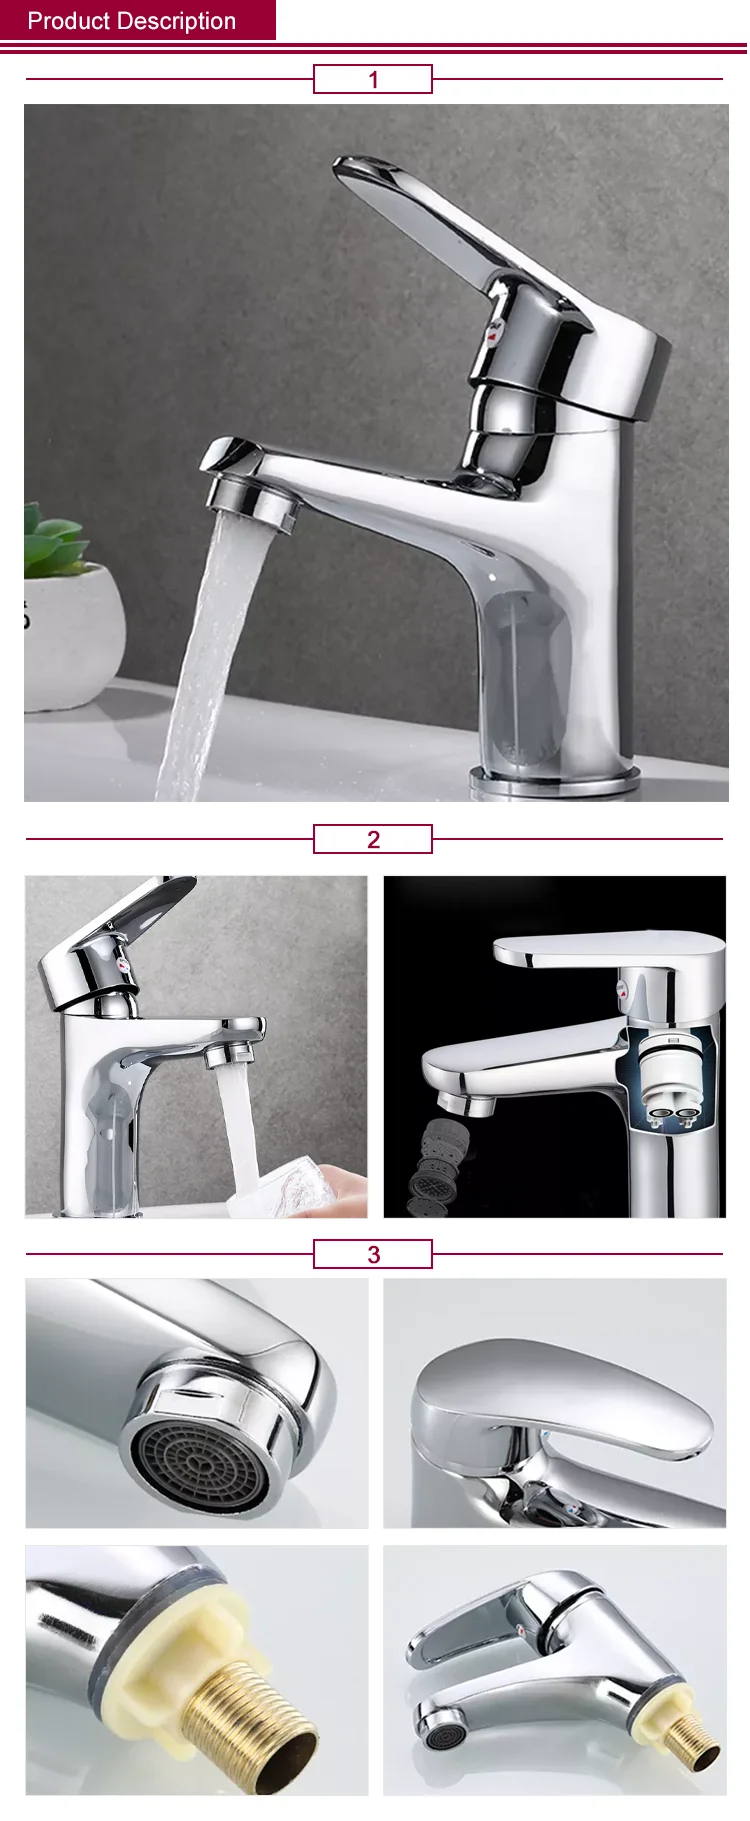 Sales Promotion Hotel Bathroom Basin Shower Faucets Sink Mixers